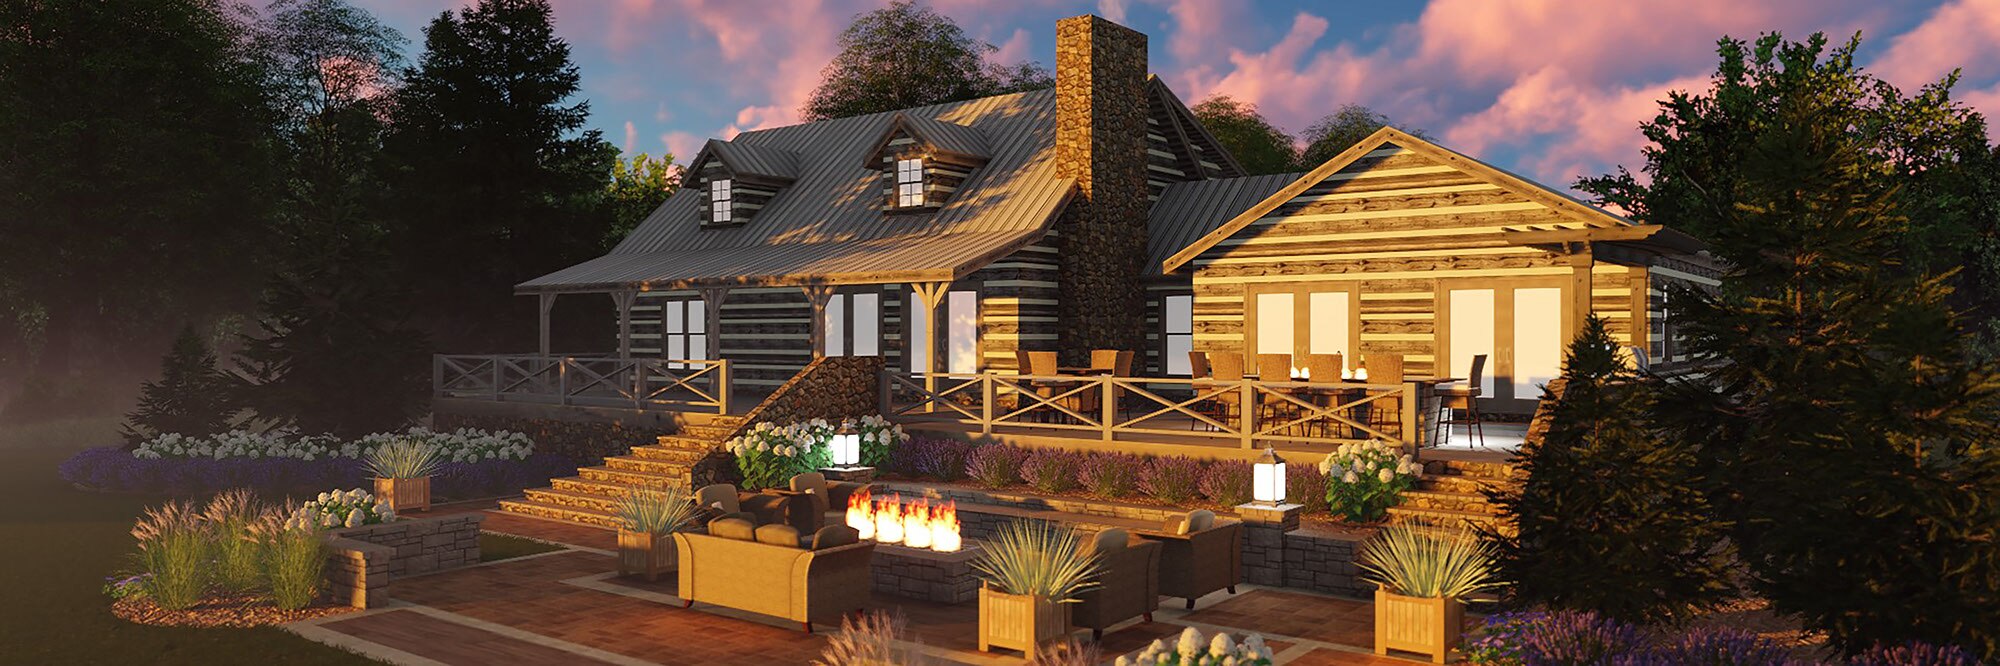 Modern log house with wood deck, large planter boxes, wooden stairs leading to lawn with seating around a firepit.